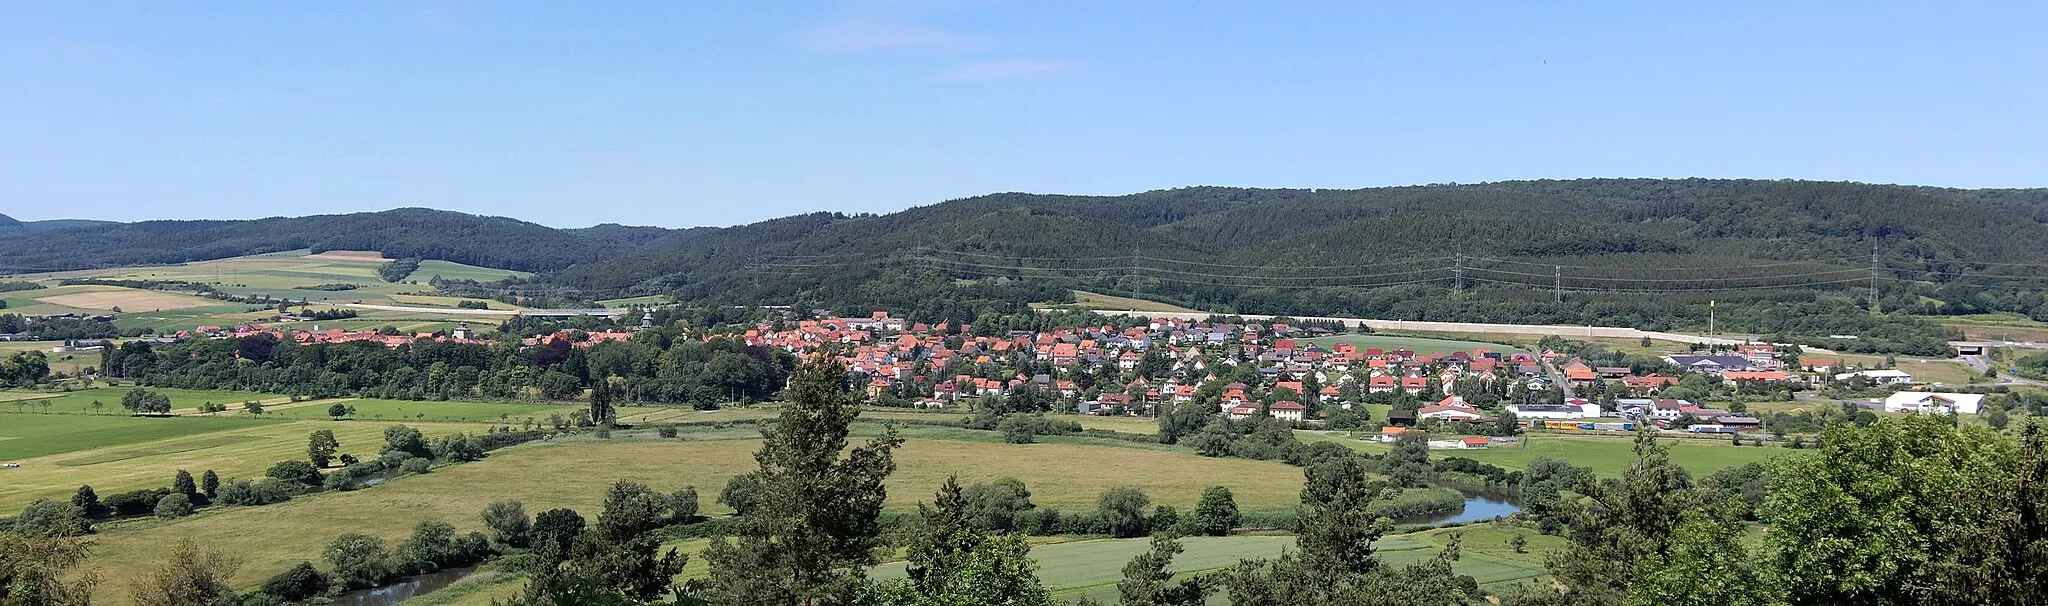 Photo showing: Herleshausen, Hessen, Germany: Panoramic view from castle "Brandenburg"
This image was stiched from 3 Images by using hugin software